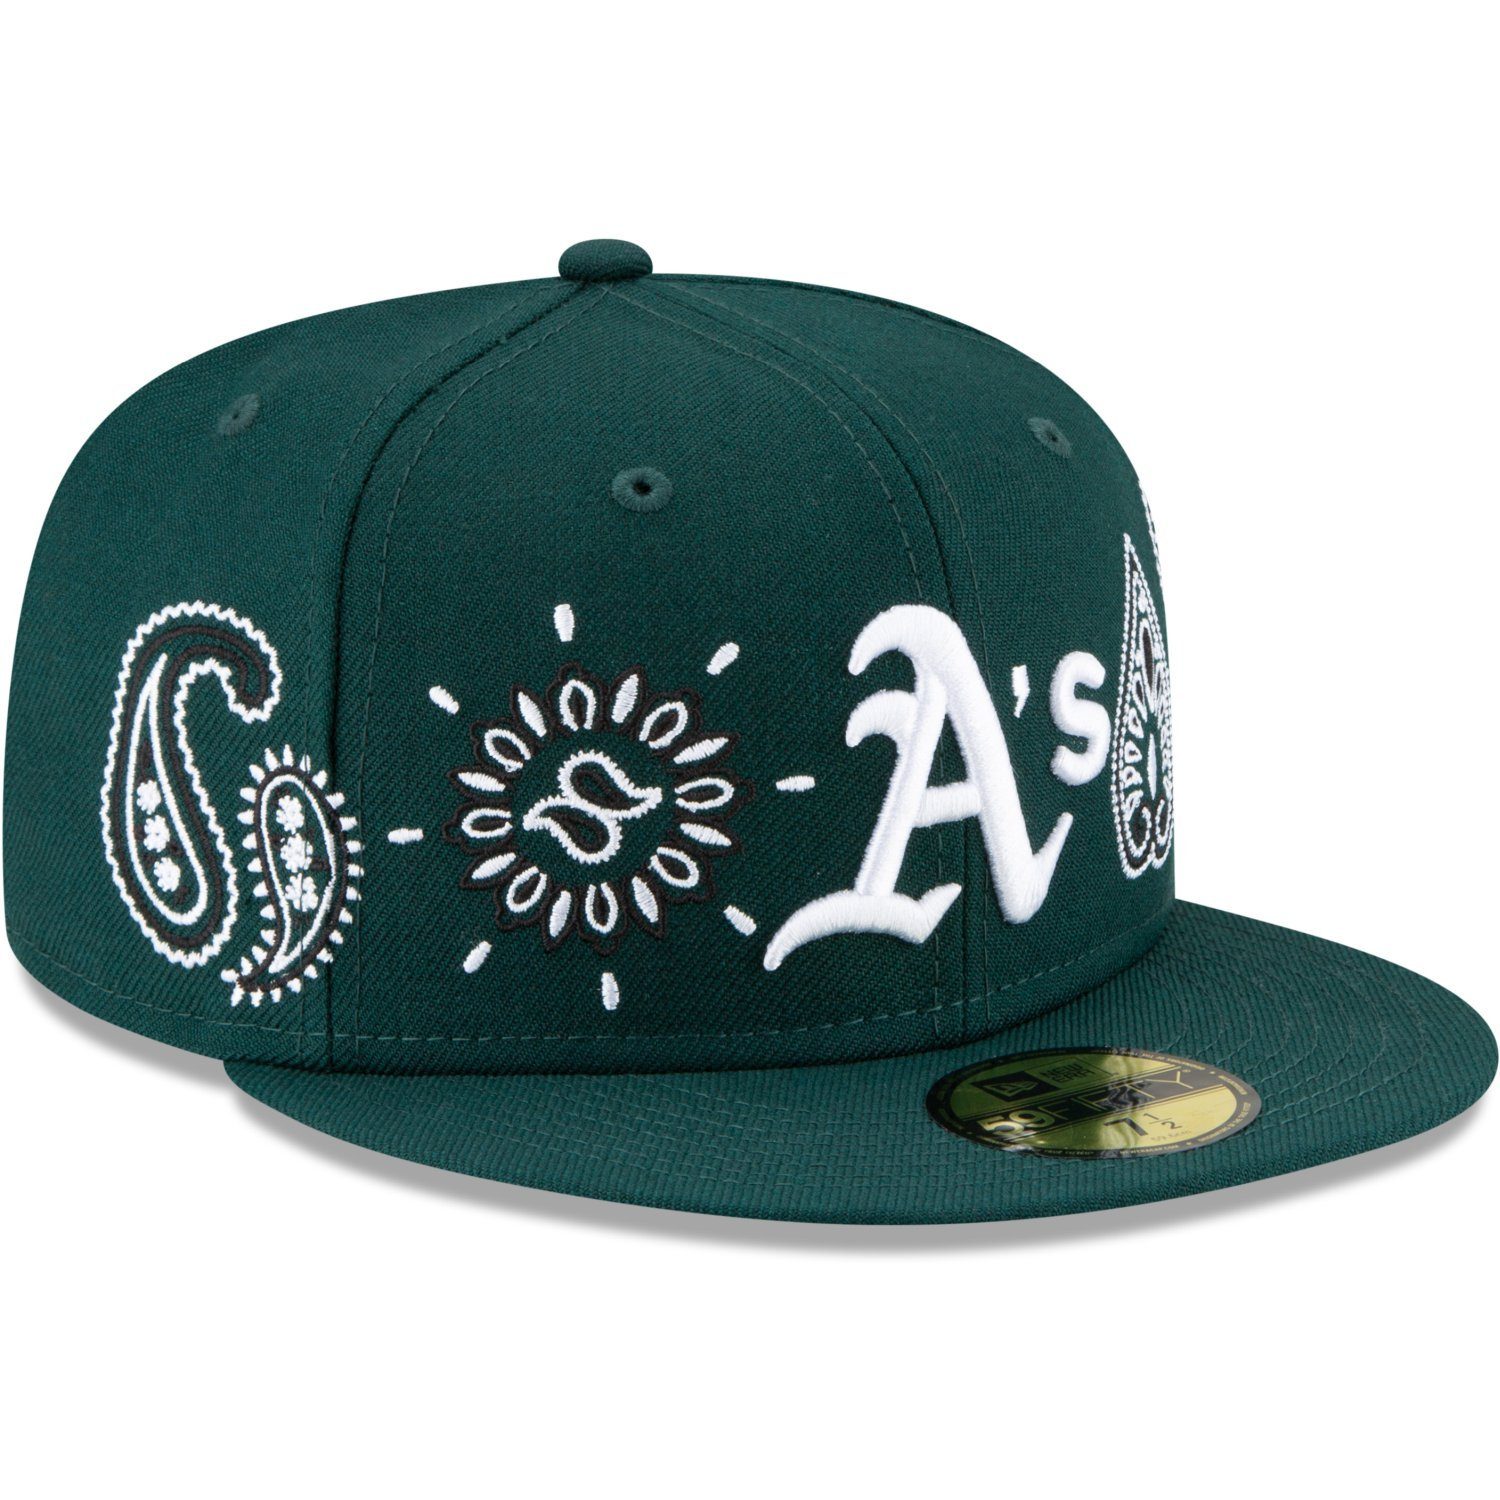 Athletics PAISLEY Oakland New 59Fifty Fitted Era Cap